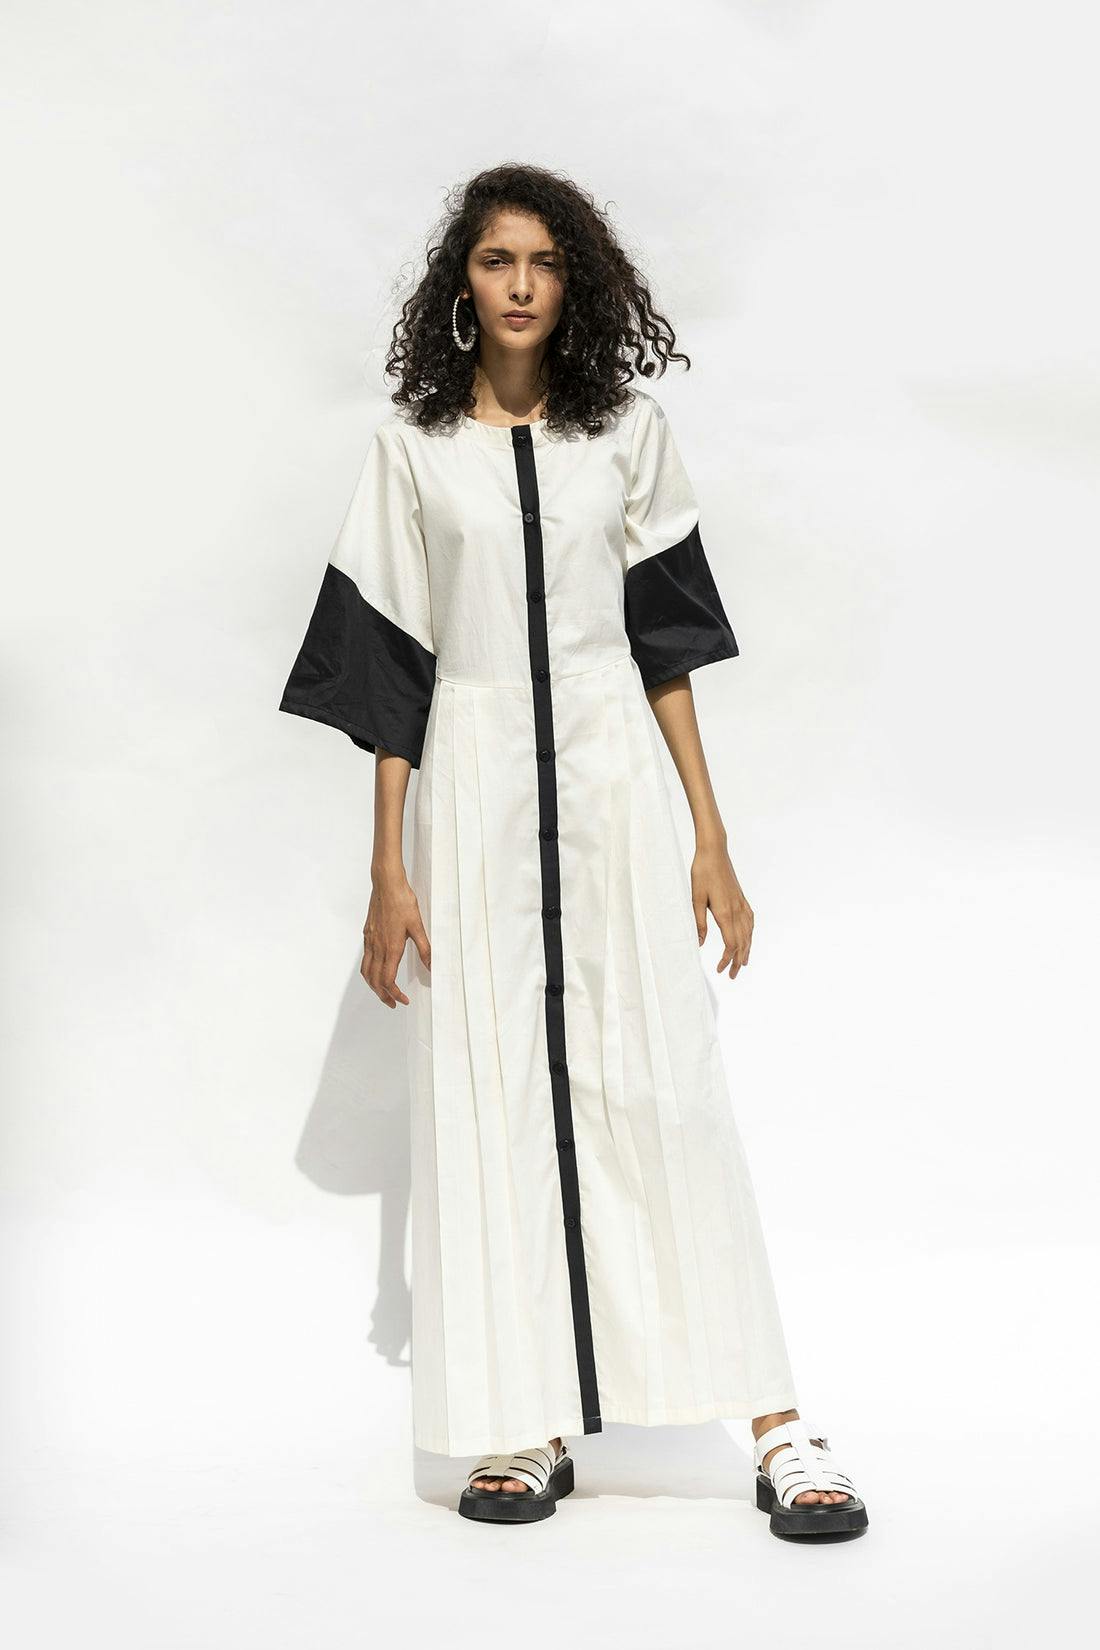 Panelled Cotton Dress with Pleats, a product by Corpora Studio